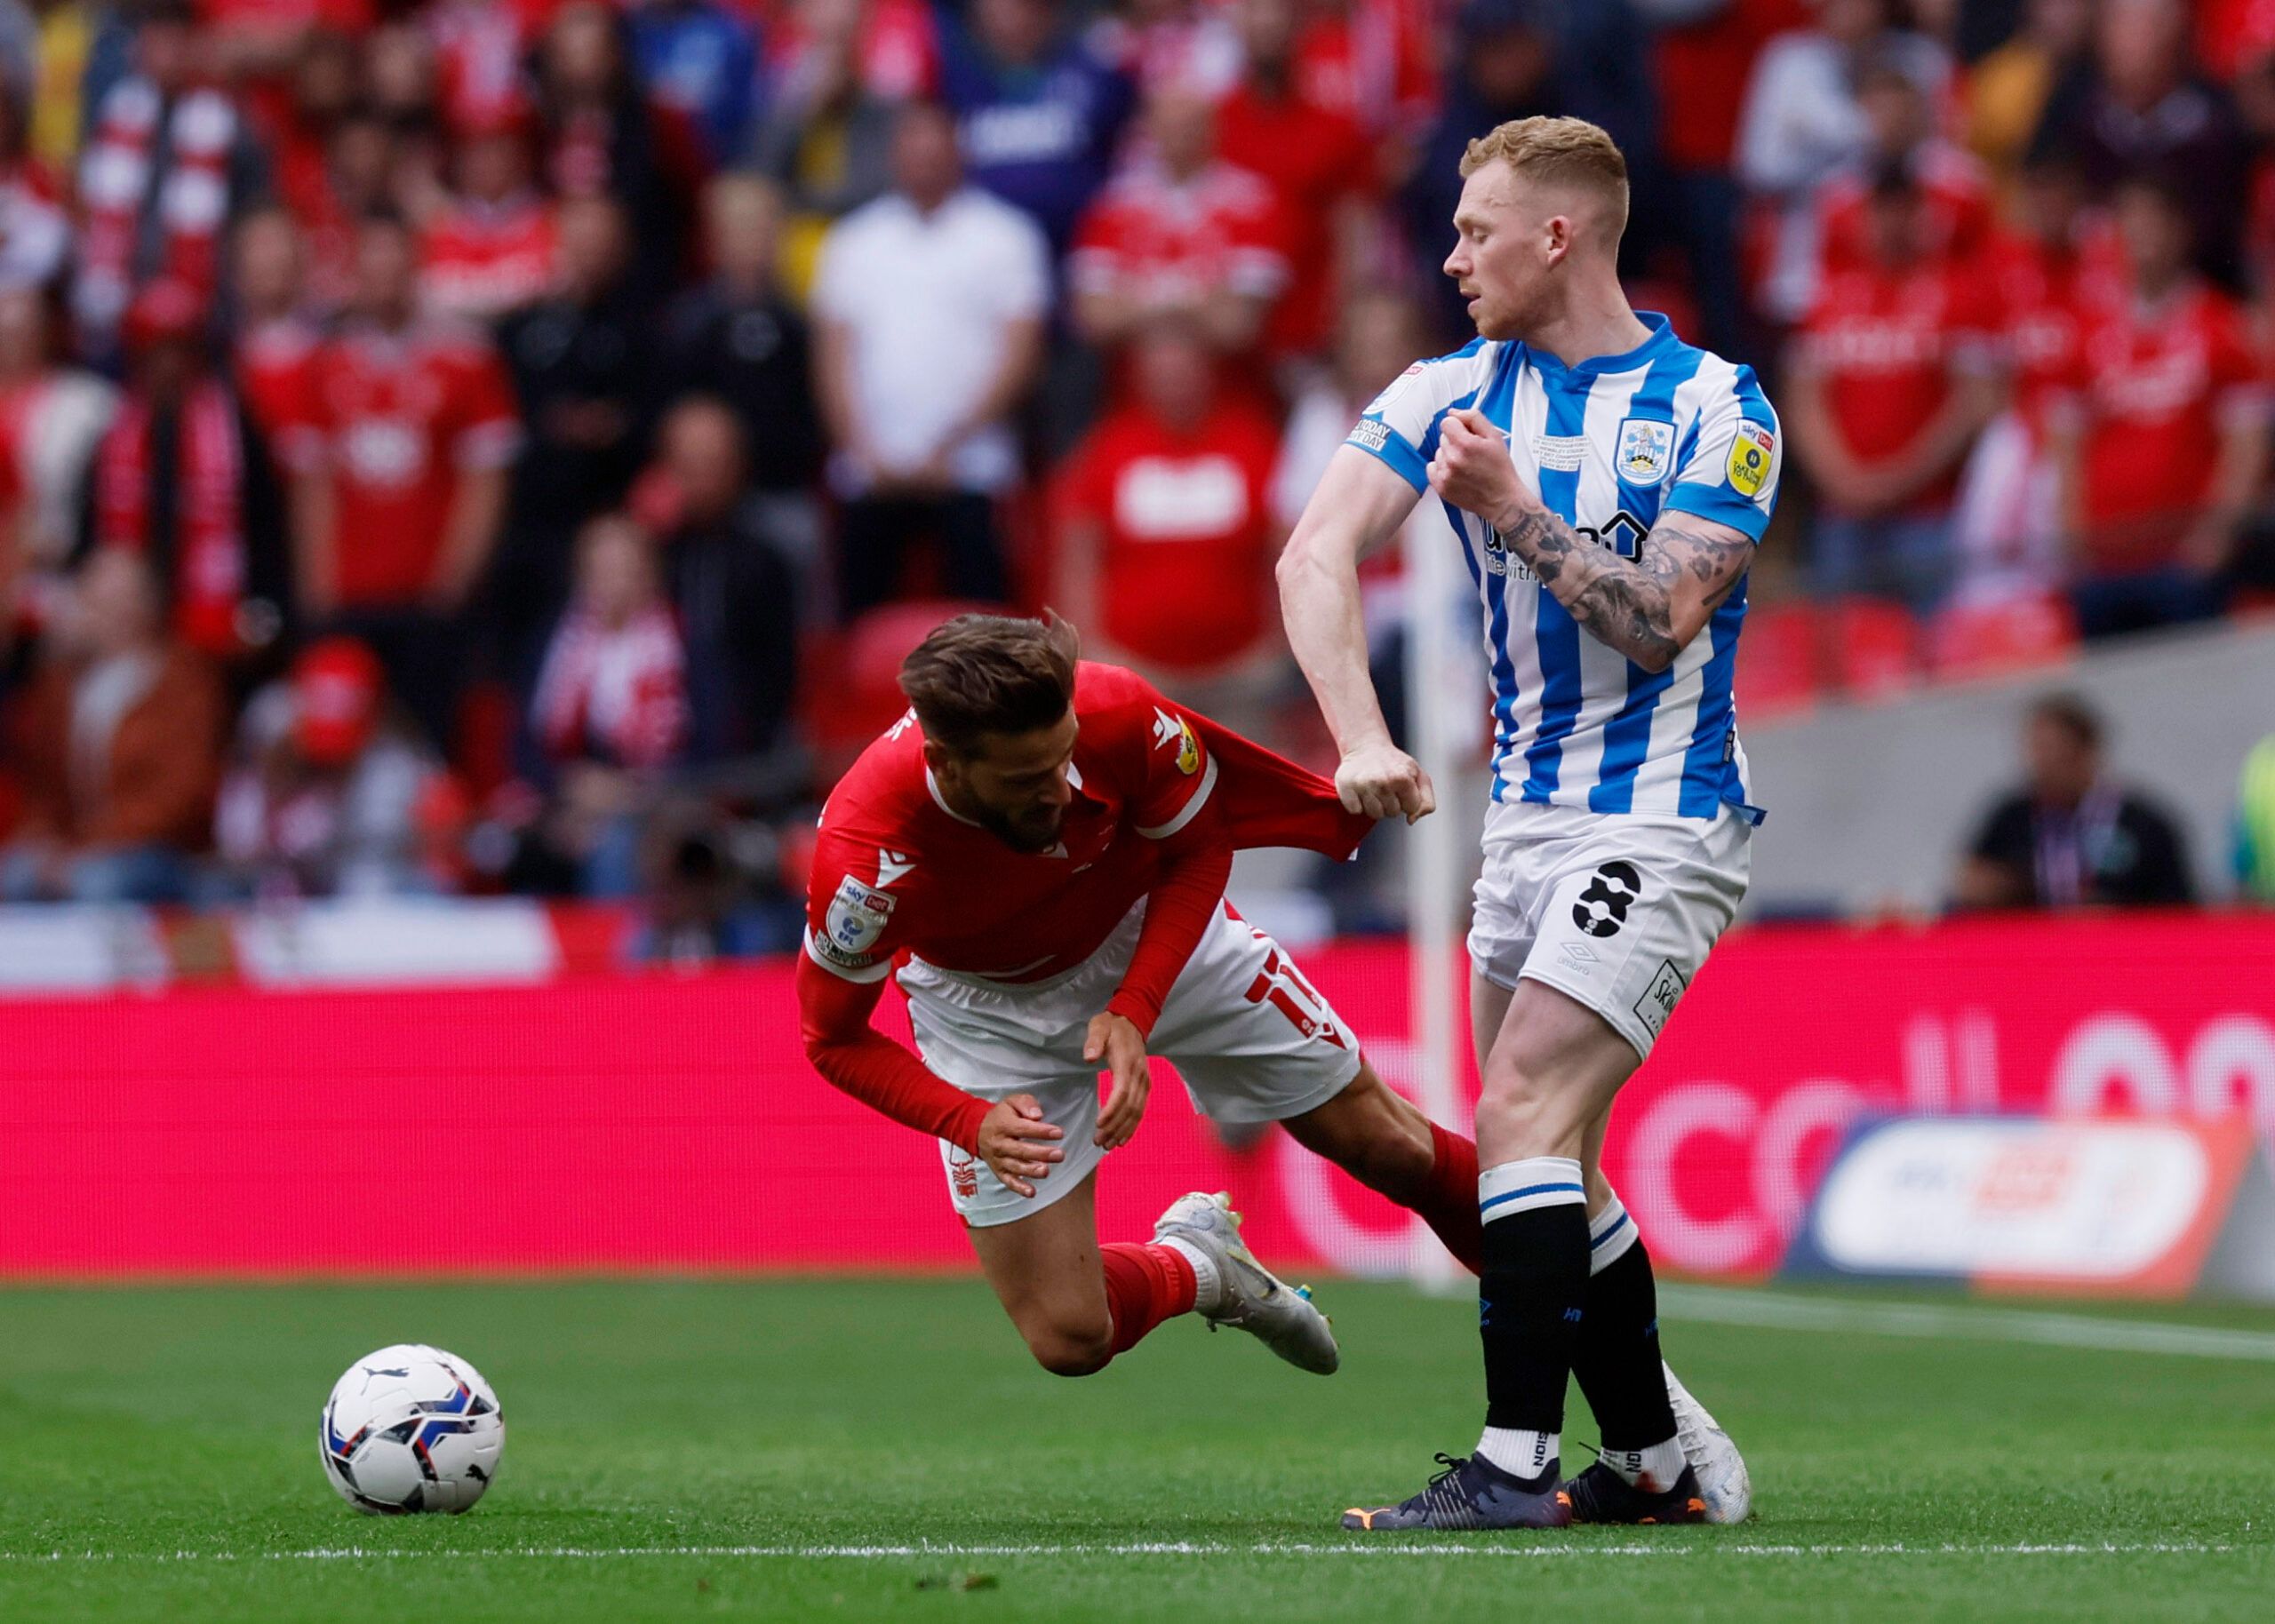 Soccer Football - Championship Play-Off Final - Huddersfield Town v Nottingham Forest - Wembley Stadium, London, Britain - May 29, 2022 Nottingham Forest's Philip Zinckernagel in action with Huddersfield Town's Lewis O'Brien Action Images via Reuters/Andrew Couldridge